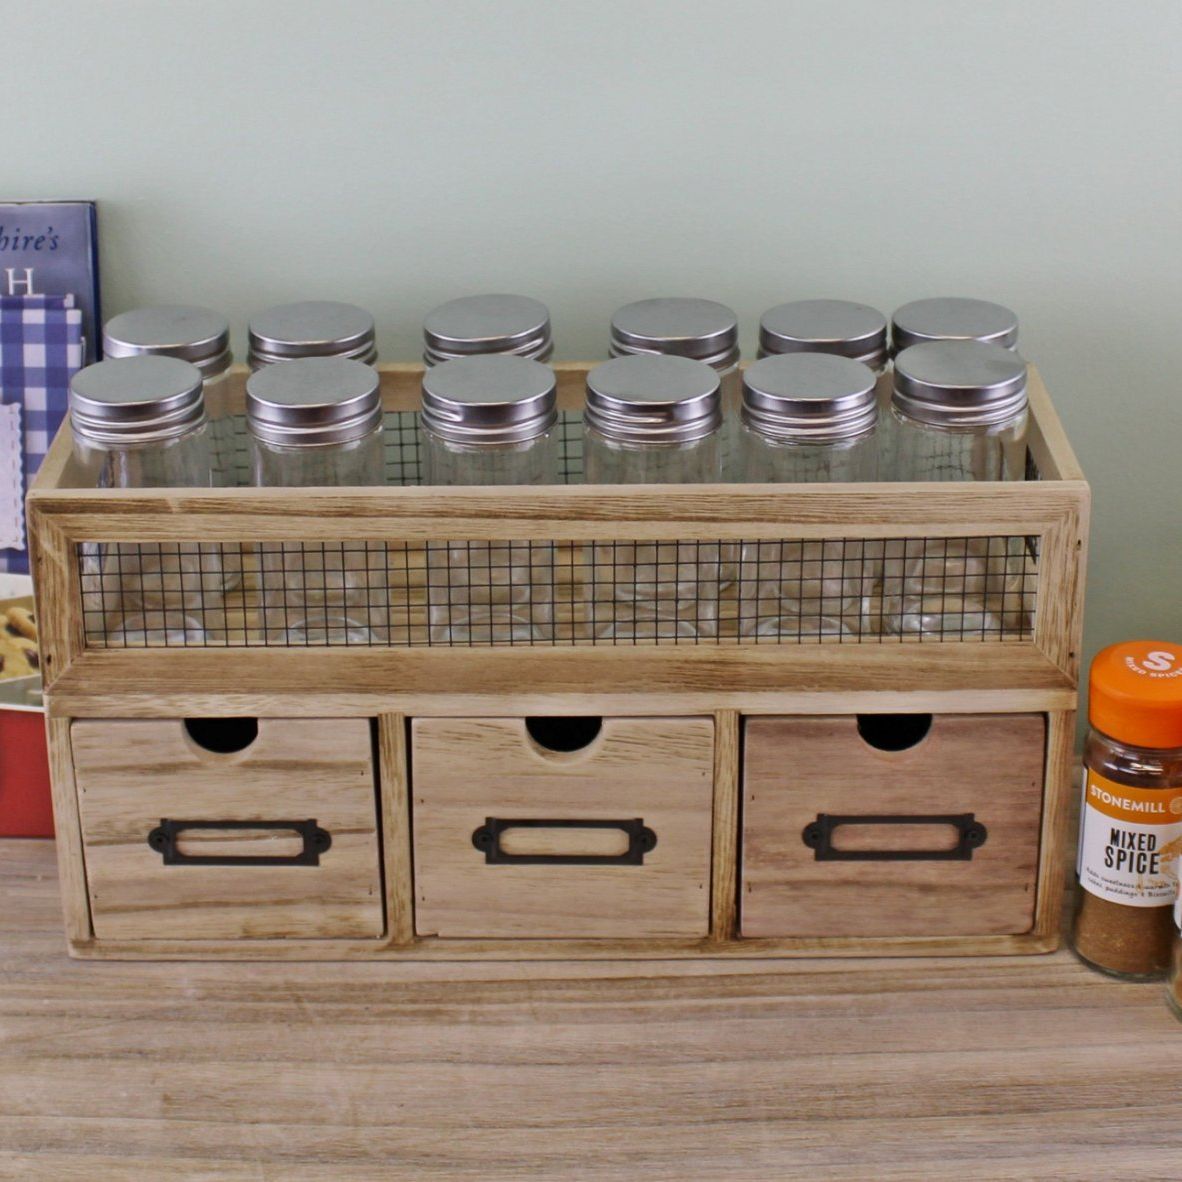 12 Jar Freestanding Spice Rack With Bottles & 3 Drawer Cabinet - Ashton and Finch